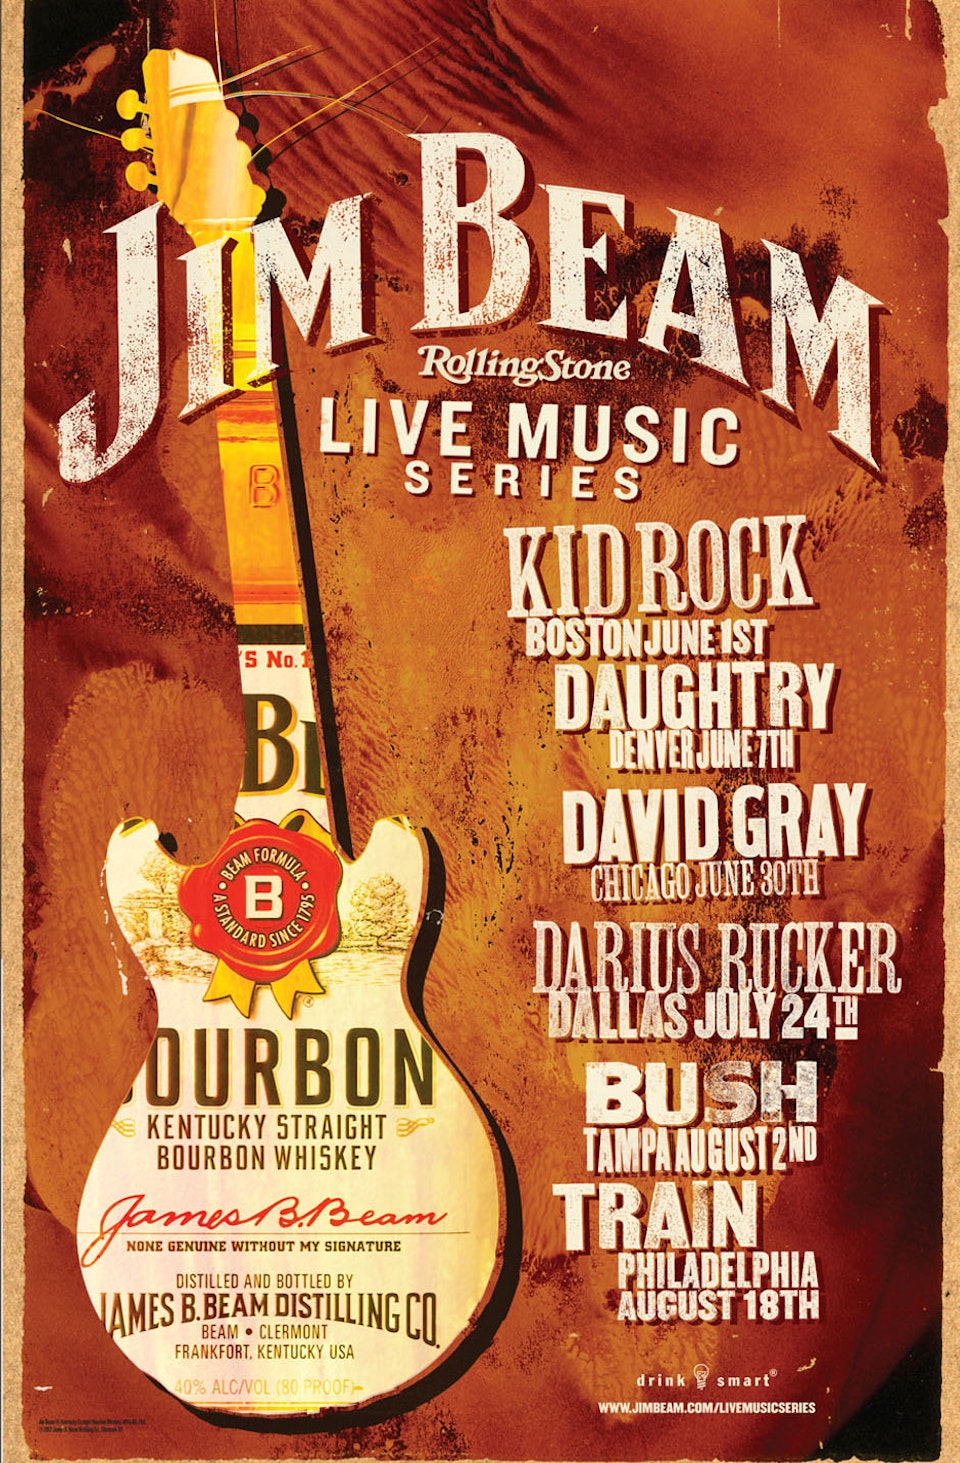 Jim Beam Concert Series Poster - A selection of comps